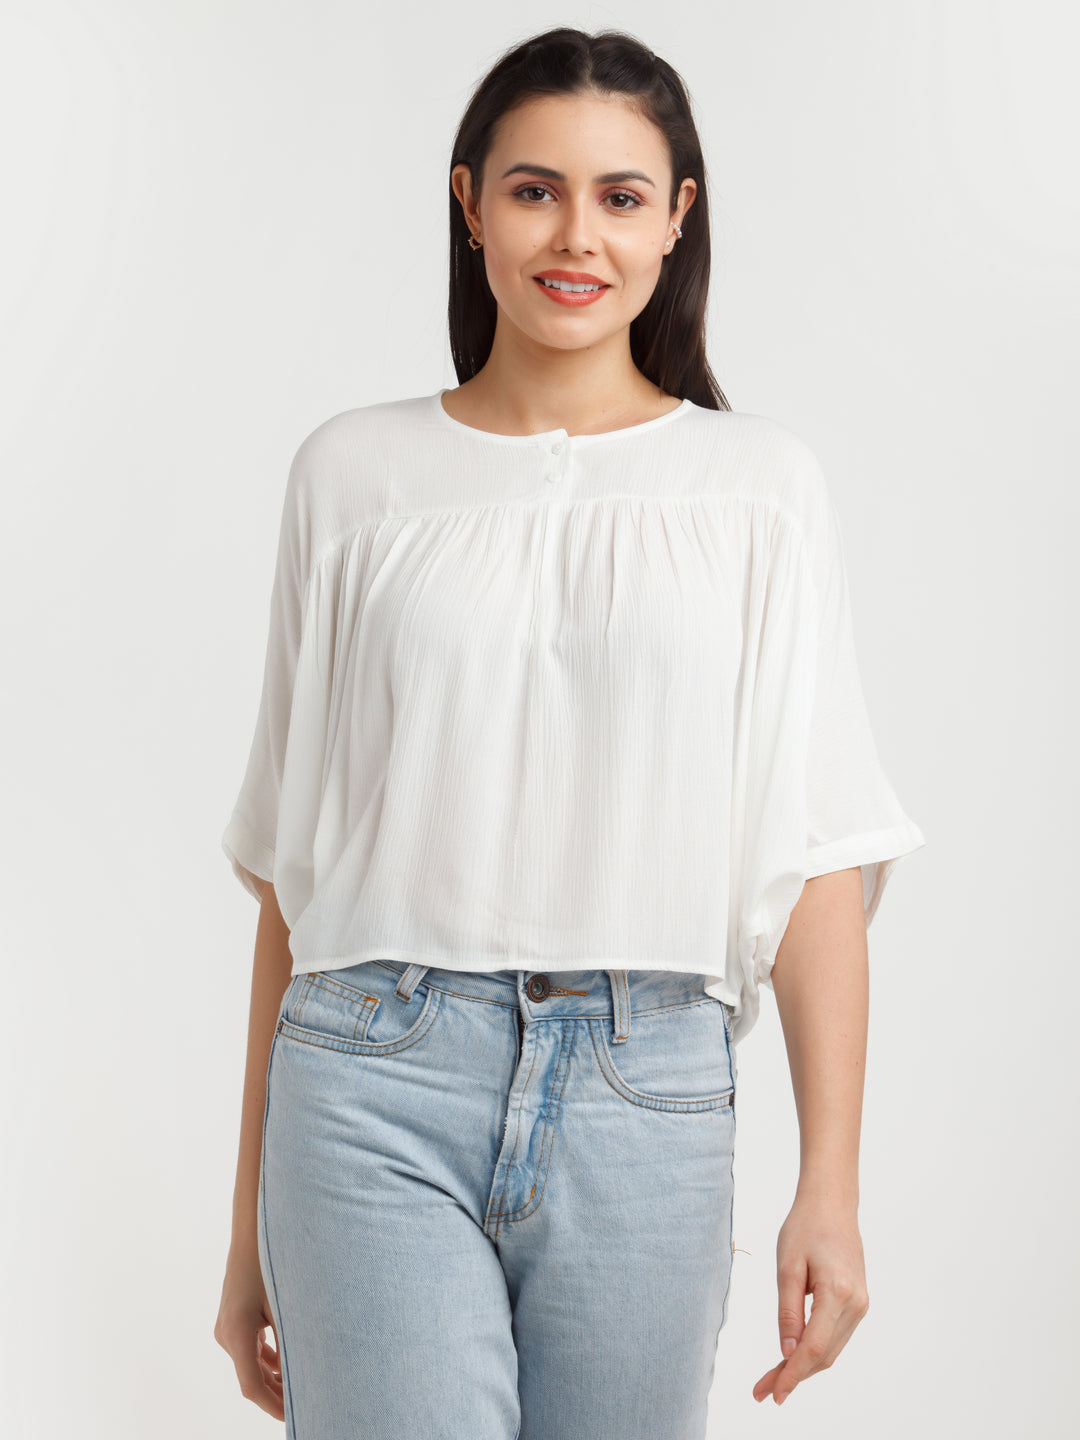 White Solid Top For Women